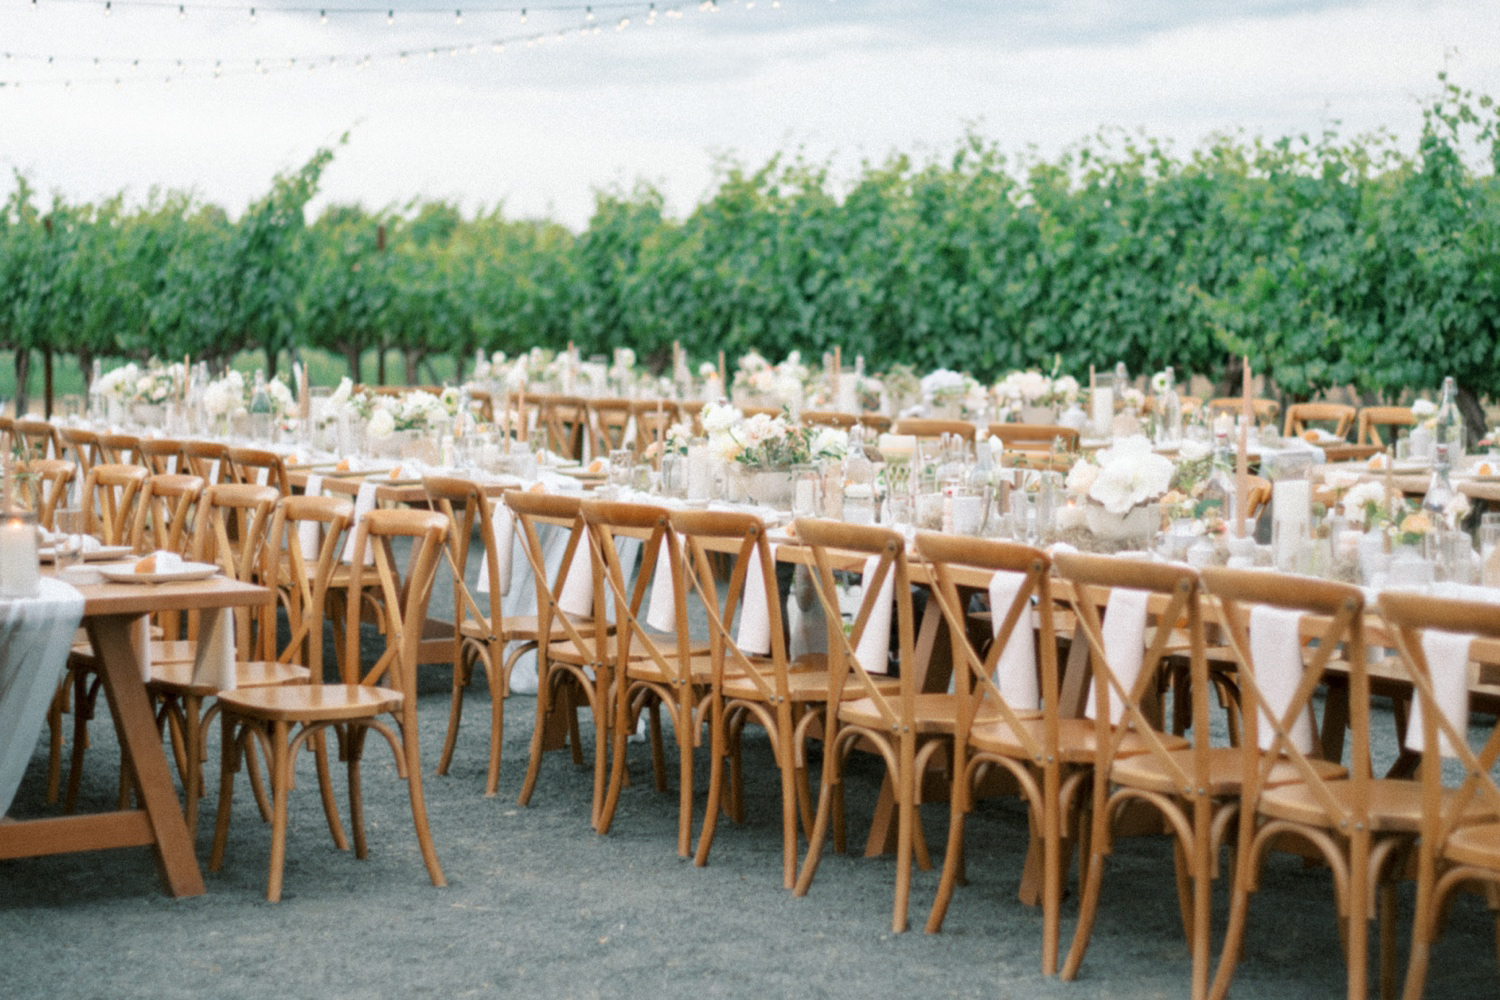 Wedding reception tables and decor for Kinhaven Winery Wedding